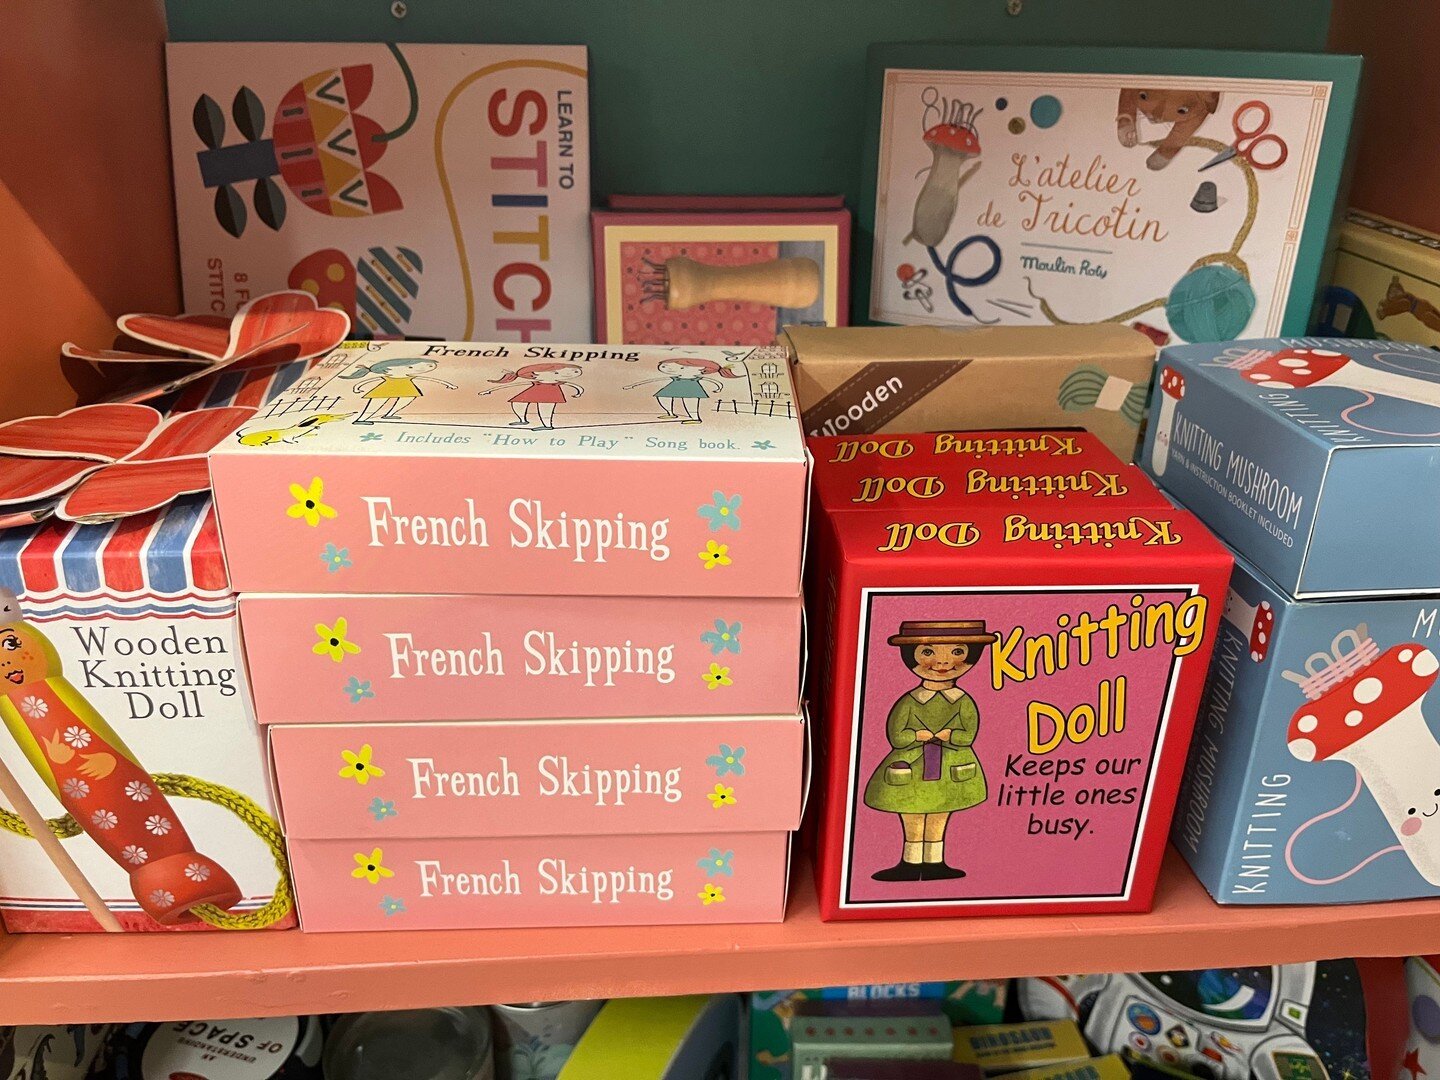 Come and explore the wonderful world of craft and string games at The Vintage Toy Box, located within Dirty Janes Canberra. We have everything you need to indulge in the nostalgia of knitting Nancy's, French skipping, and learning to stitch. Our spec